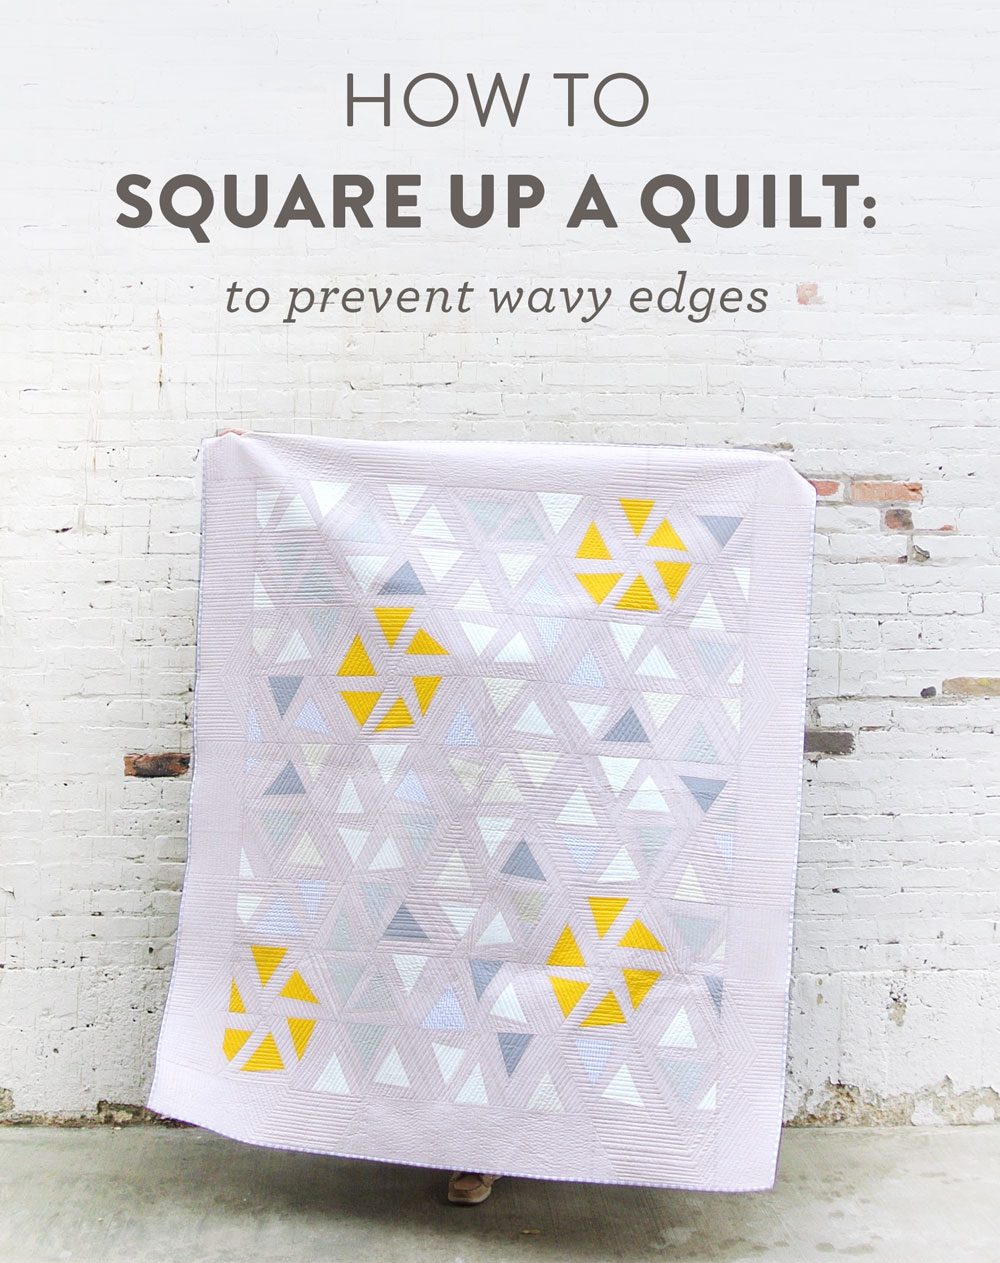 A fun blog series answering all of your basic quilting questions. Have you wondered how to square up a quilt? Let me show you!